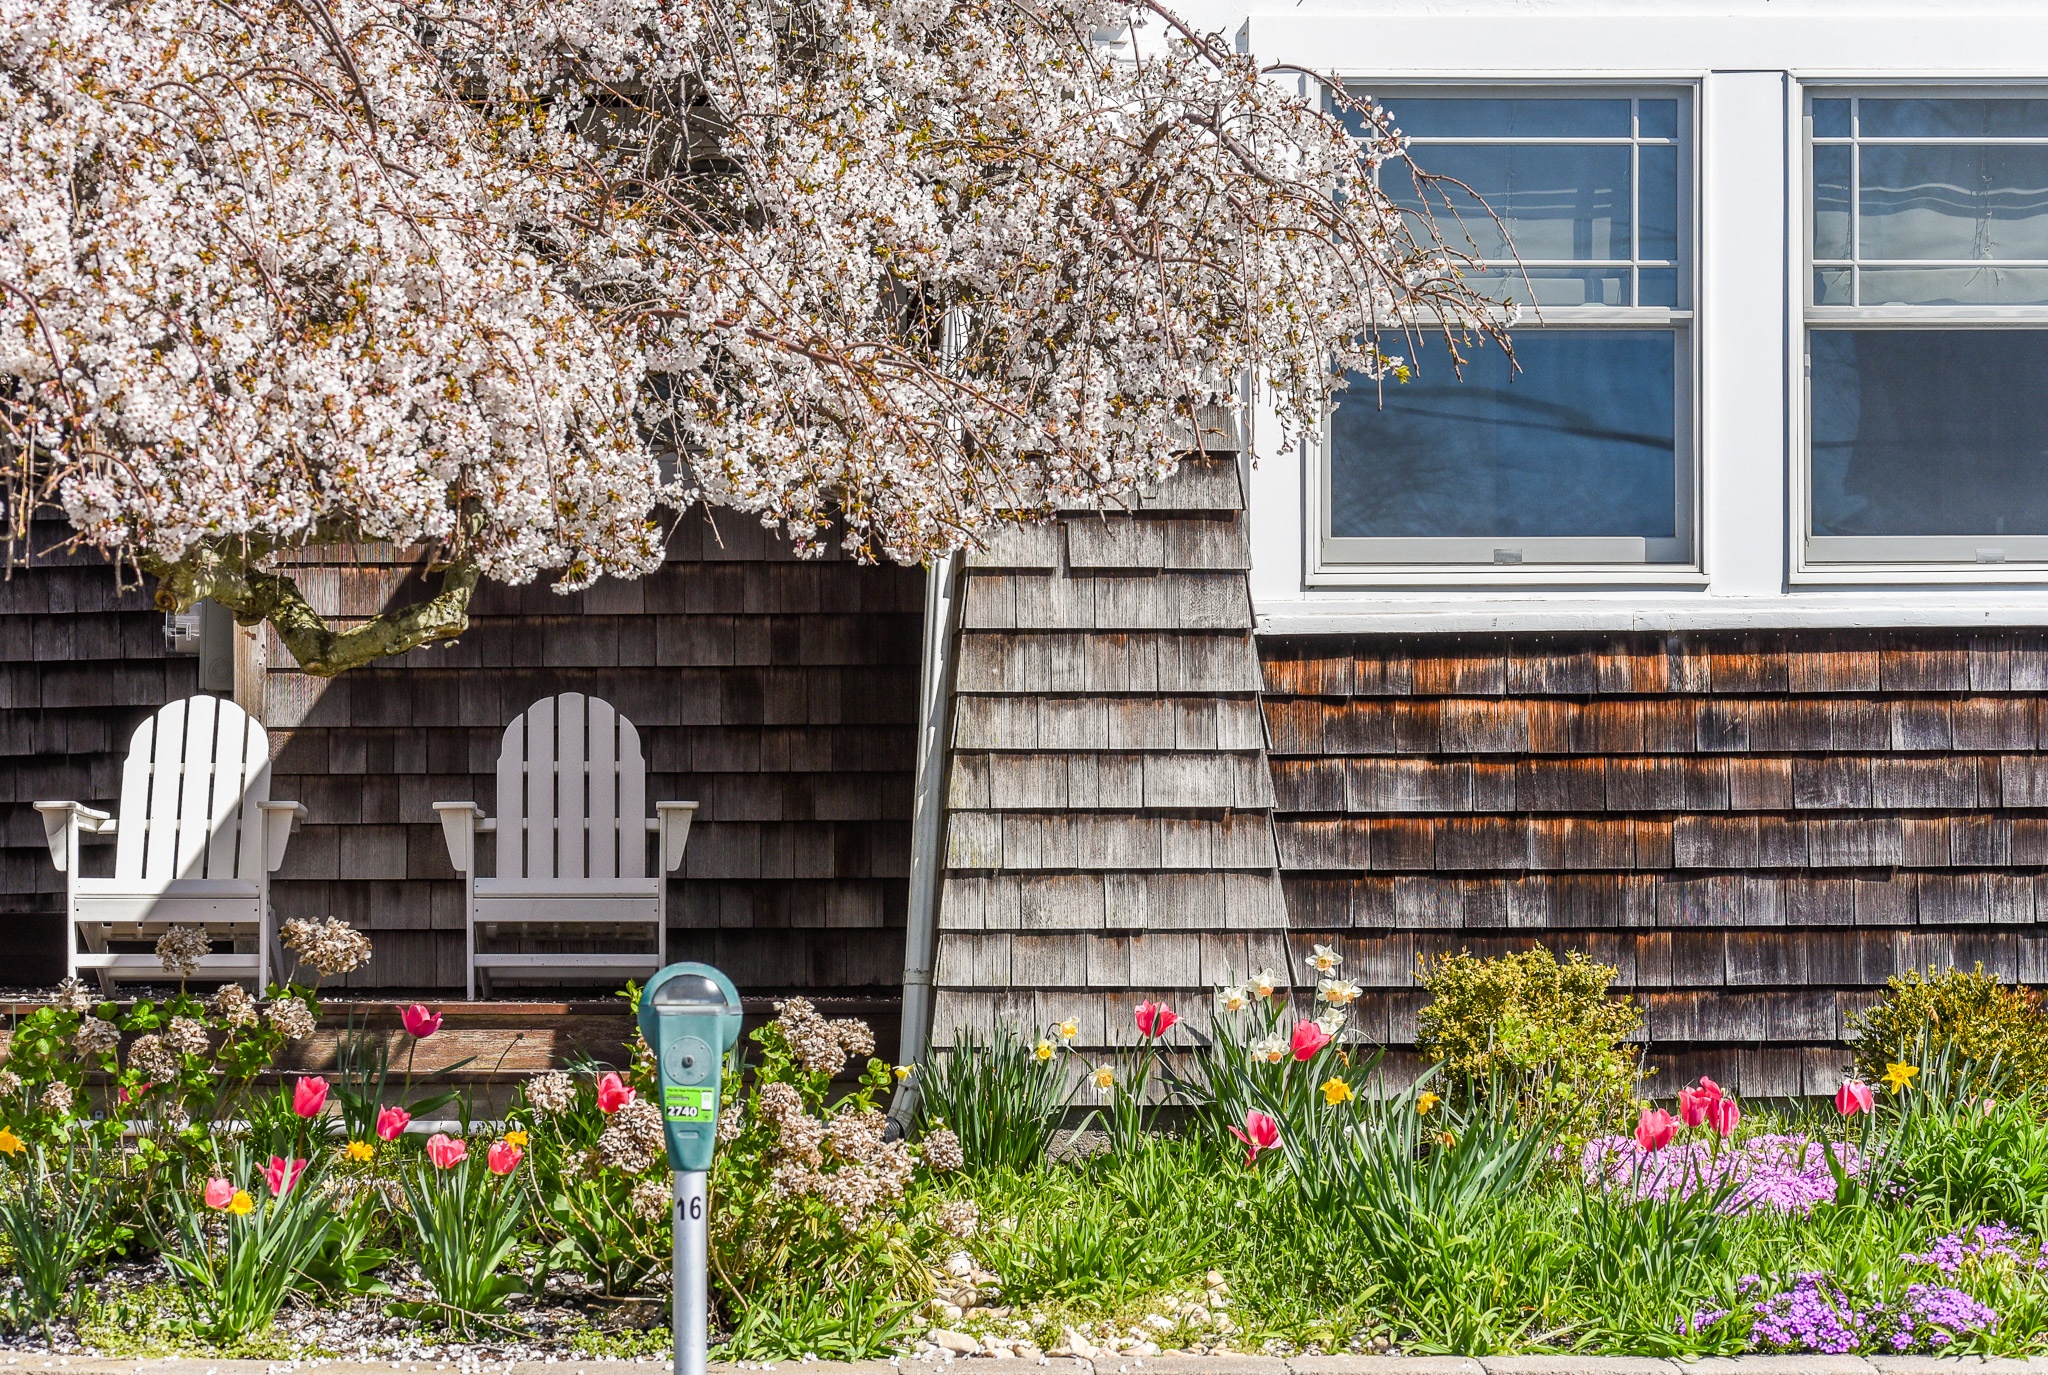 A sunny day where all the flowers will make you smile while sitting on this porch.